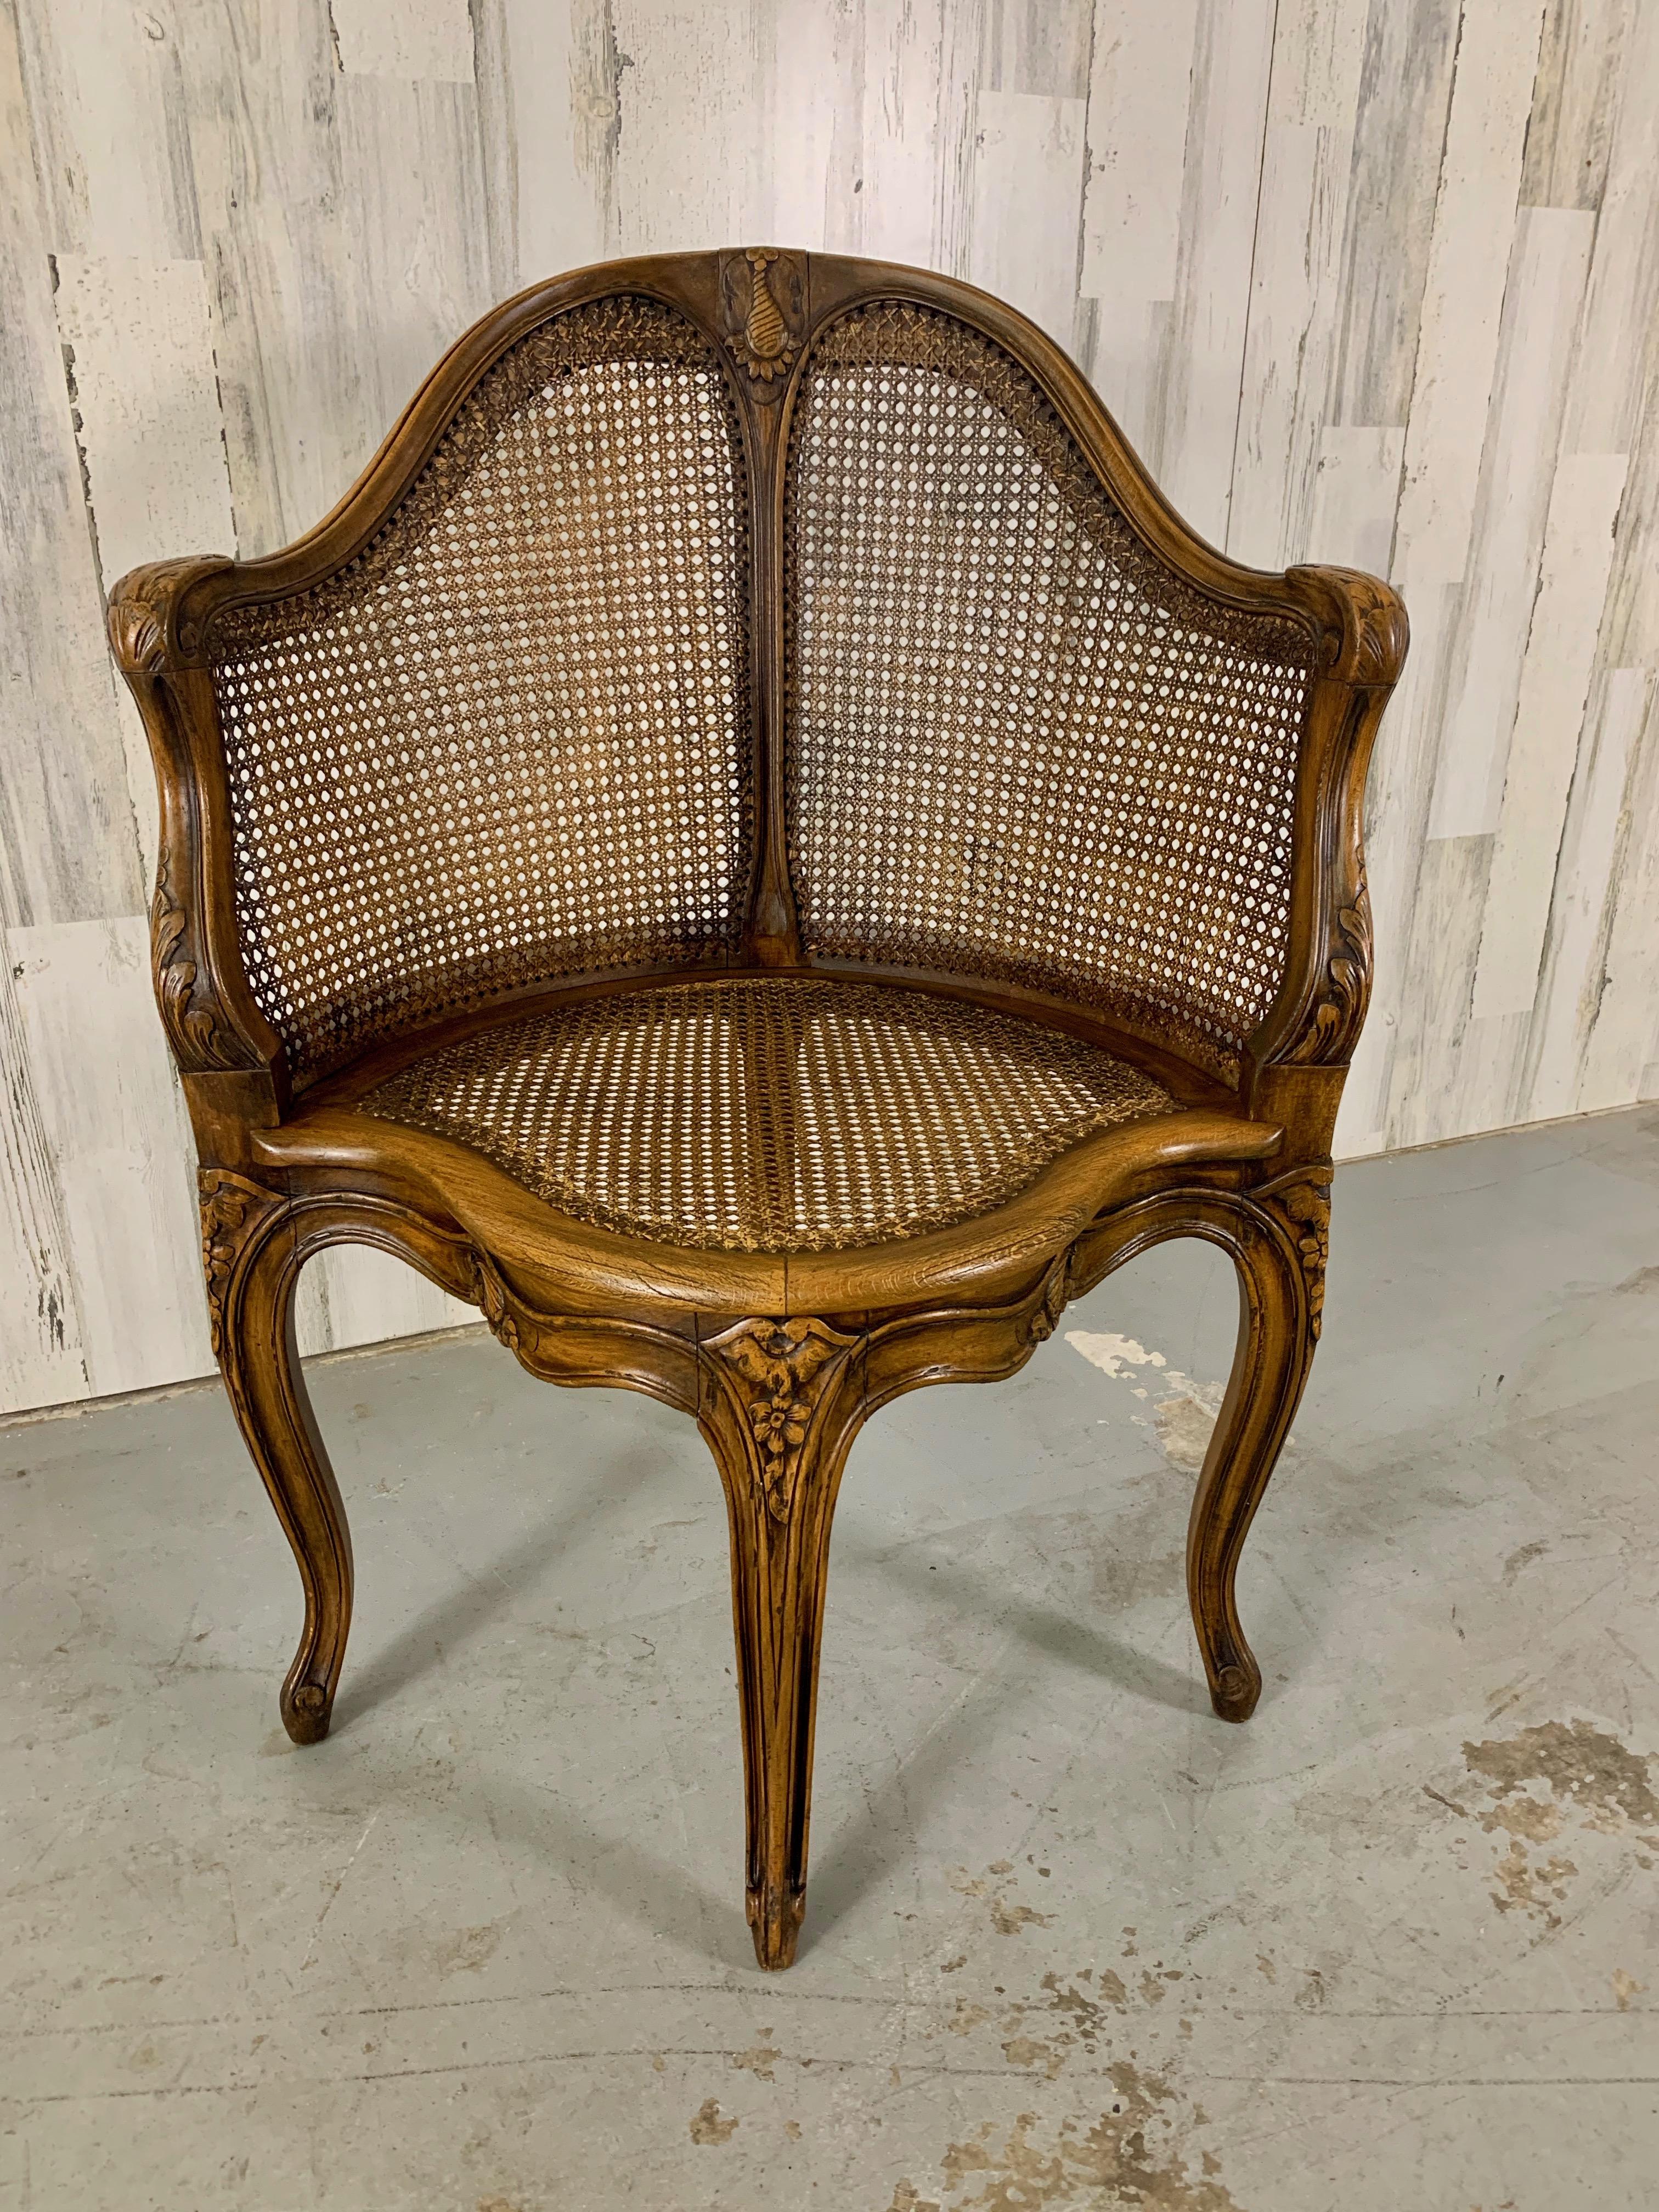 Antique Cane Corner Chair In Good Condition For Sale In Denton, TX